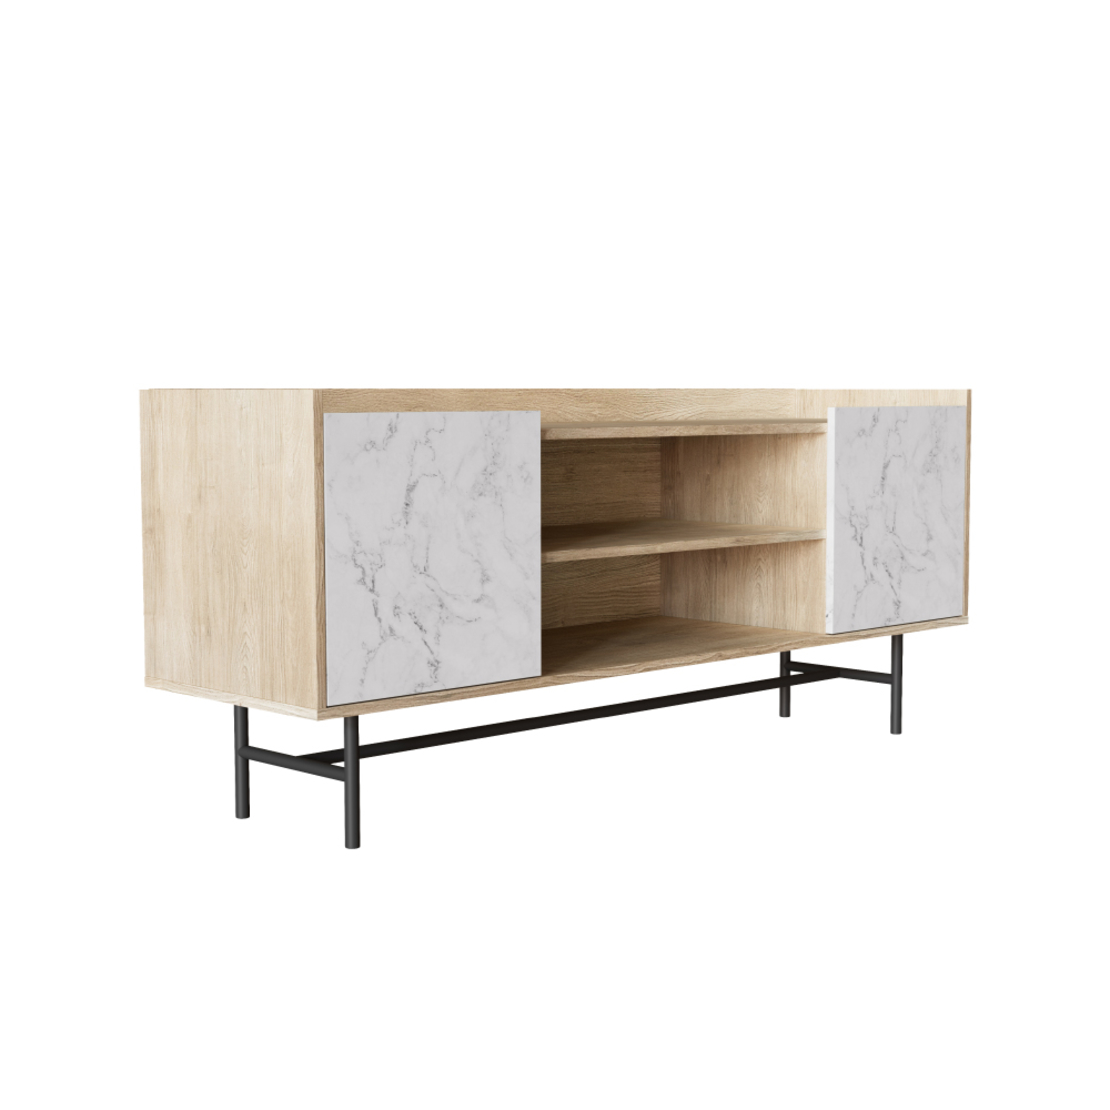 STOCKHOLM TV STAND CHIPBOARD WITH MELAMINE CARTA SONOMA DECAPE WHITE WITH MARBLE PATTERN METAL BLACK 140x39,5xH60cm E1 PRC